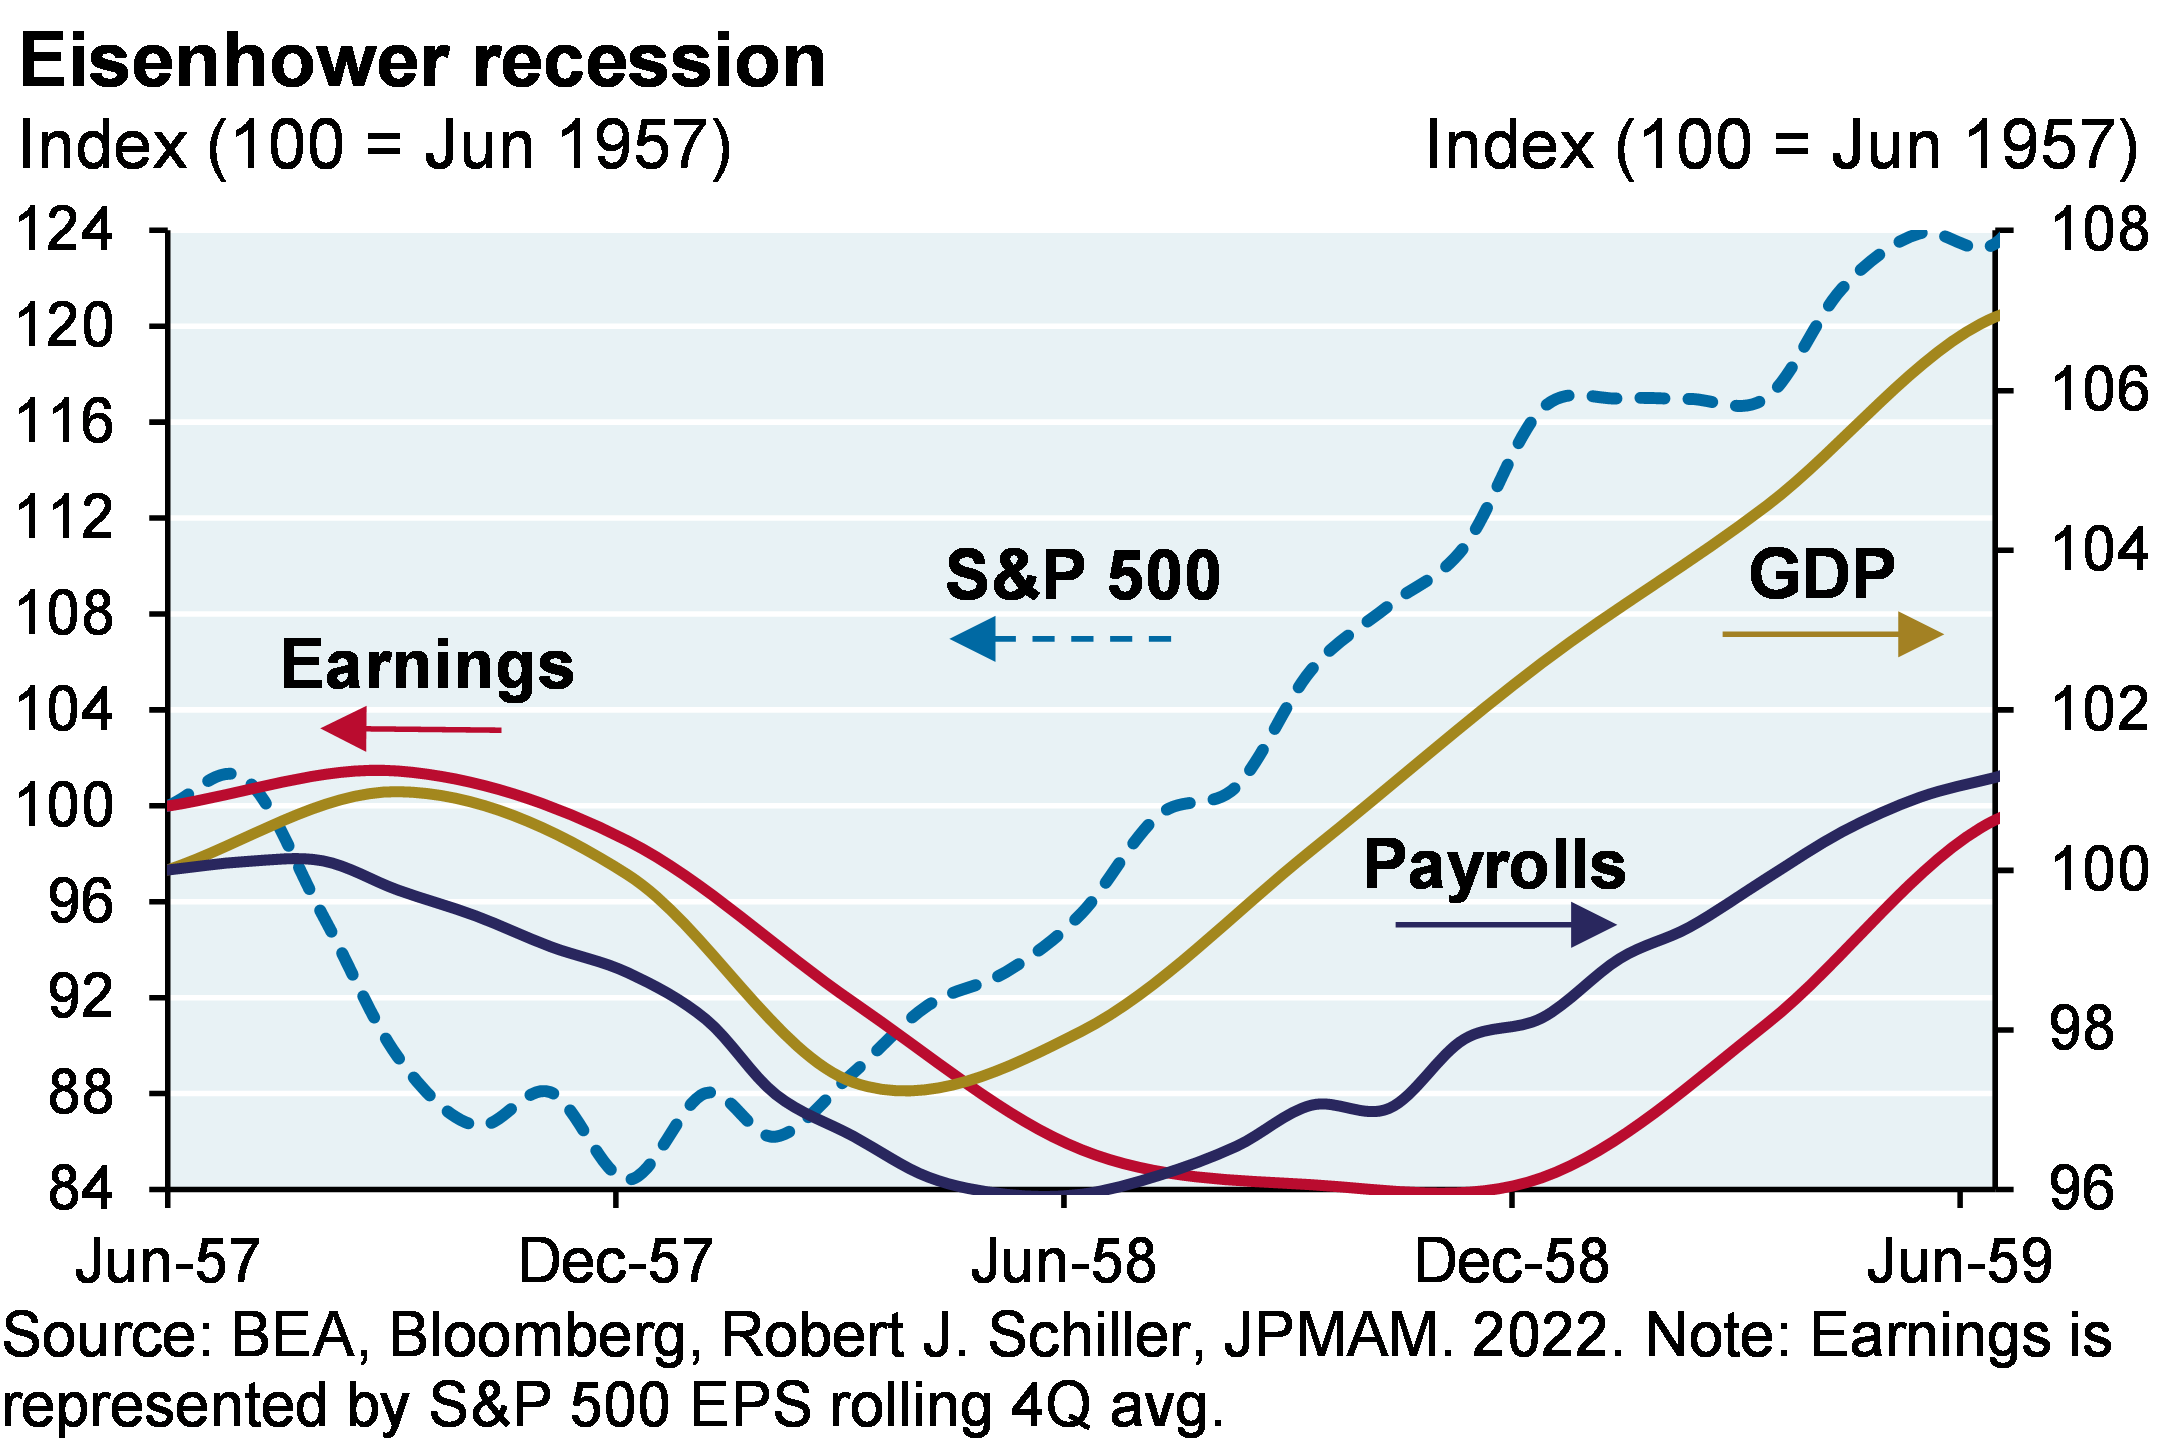 The indexed line chart compares the S&P 500, GDP, Earnings, and Nonfarm Payrolls throughout the Eisenhower recession from June 1957 to June 1959. The S&P 500 bottomed in December 1957, followed by GDP in March 1958, Payrolls in May 1958 and Earnings in September 1958. 